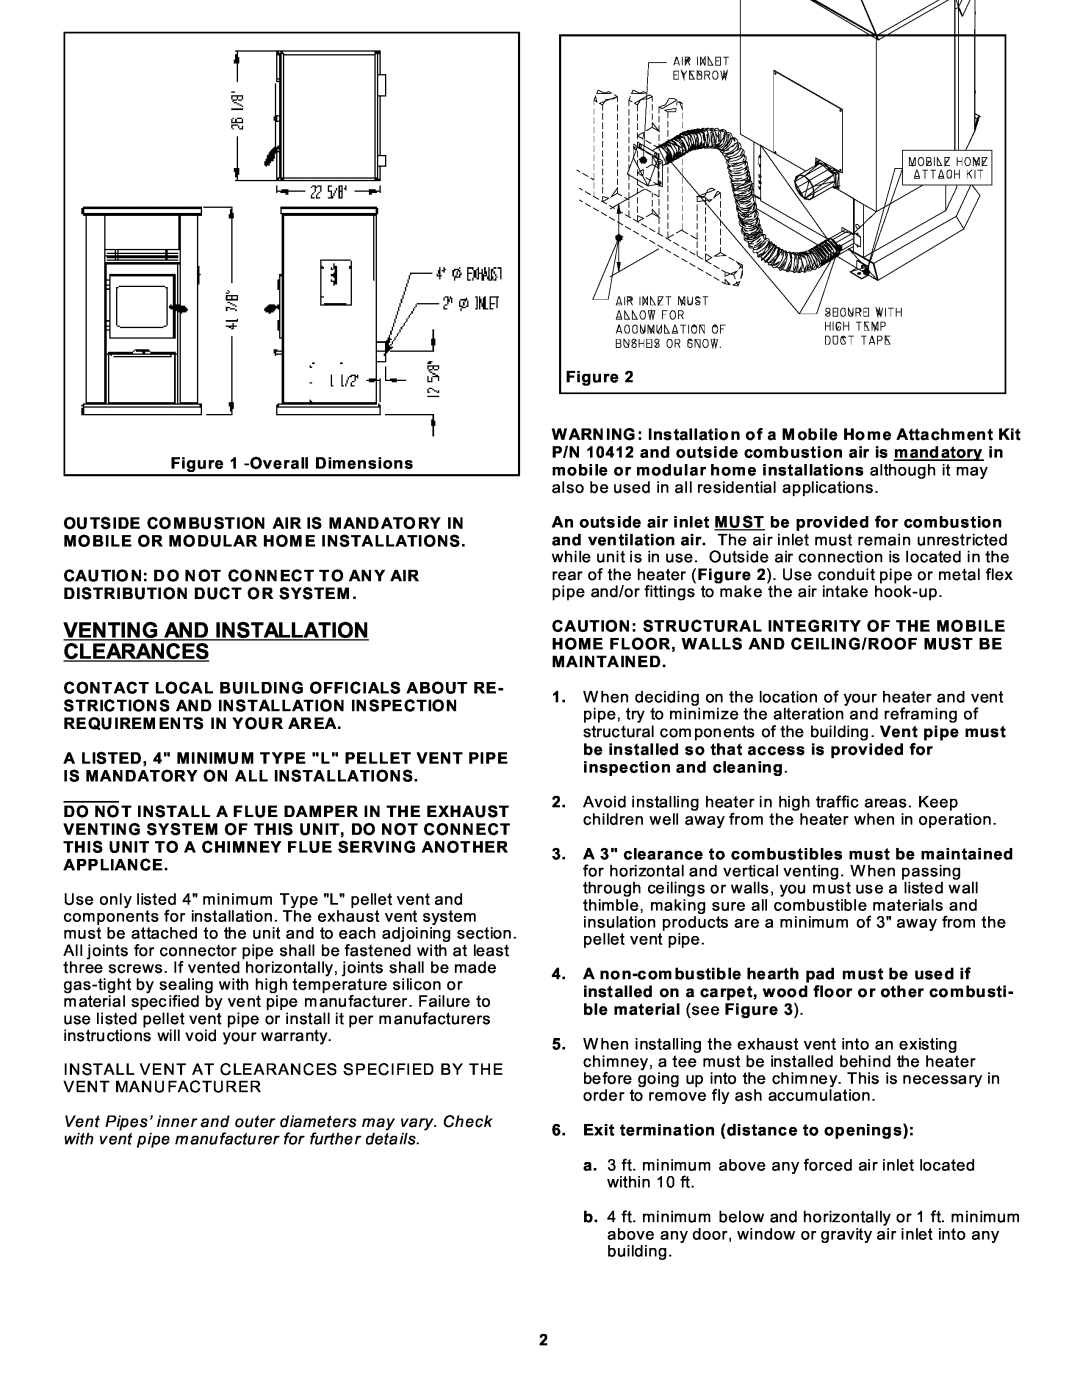 Sierra Products EF-5001UB owner manual Venting And Installation Clearances 